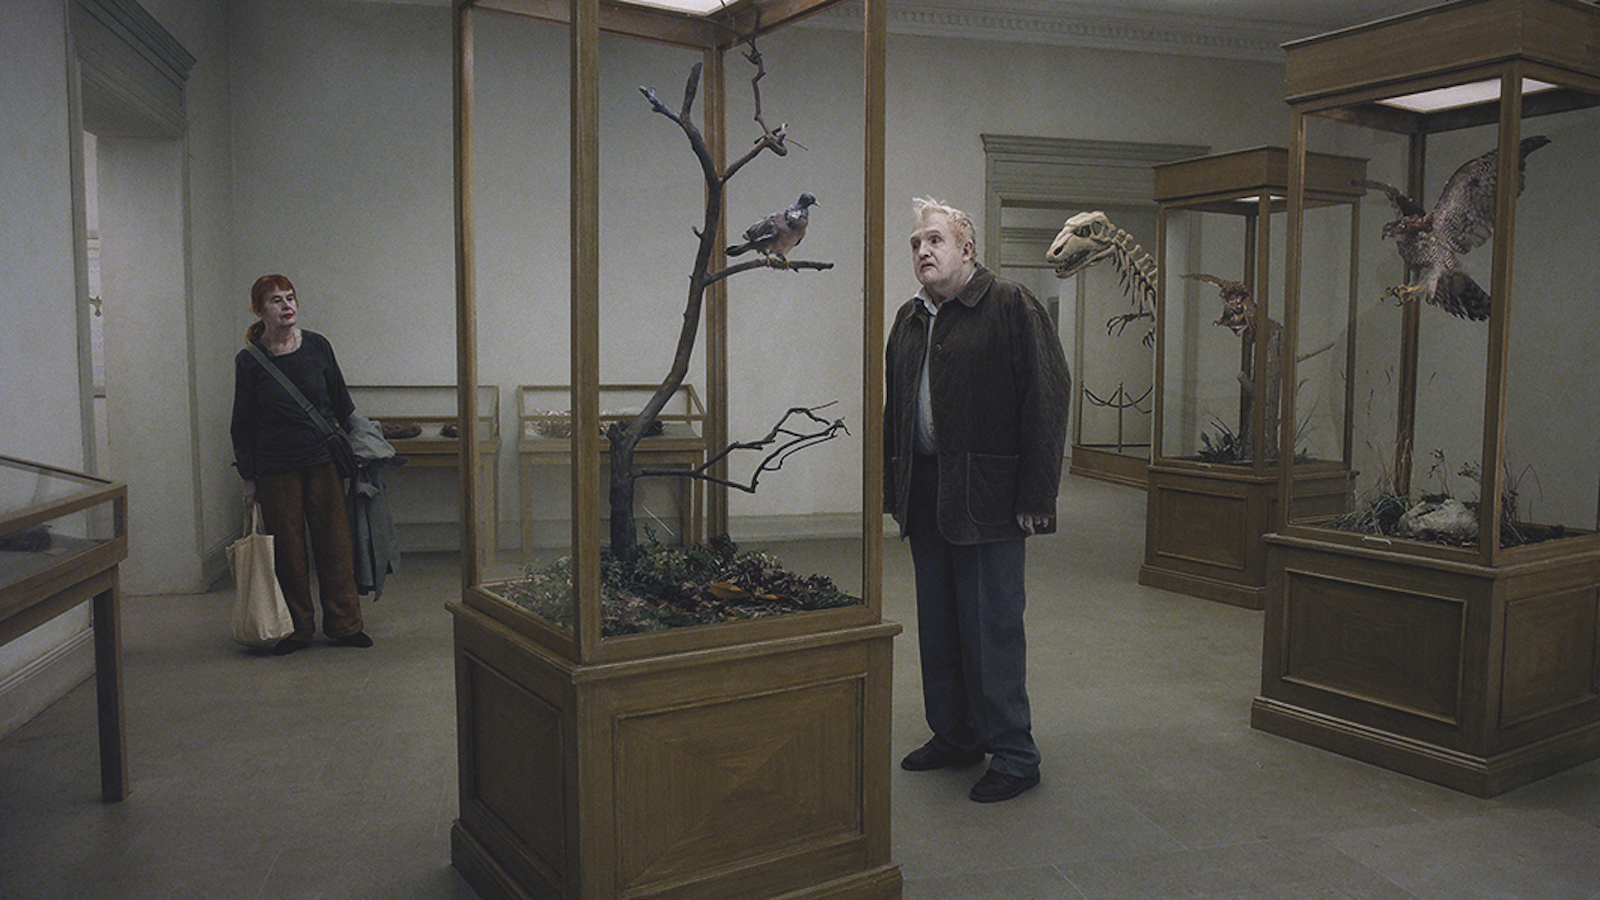 A man with pale ghostly makeup stands looking at models of birds at a museum